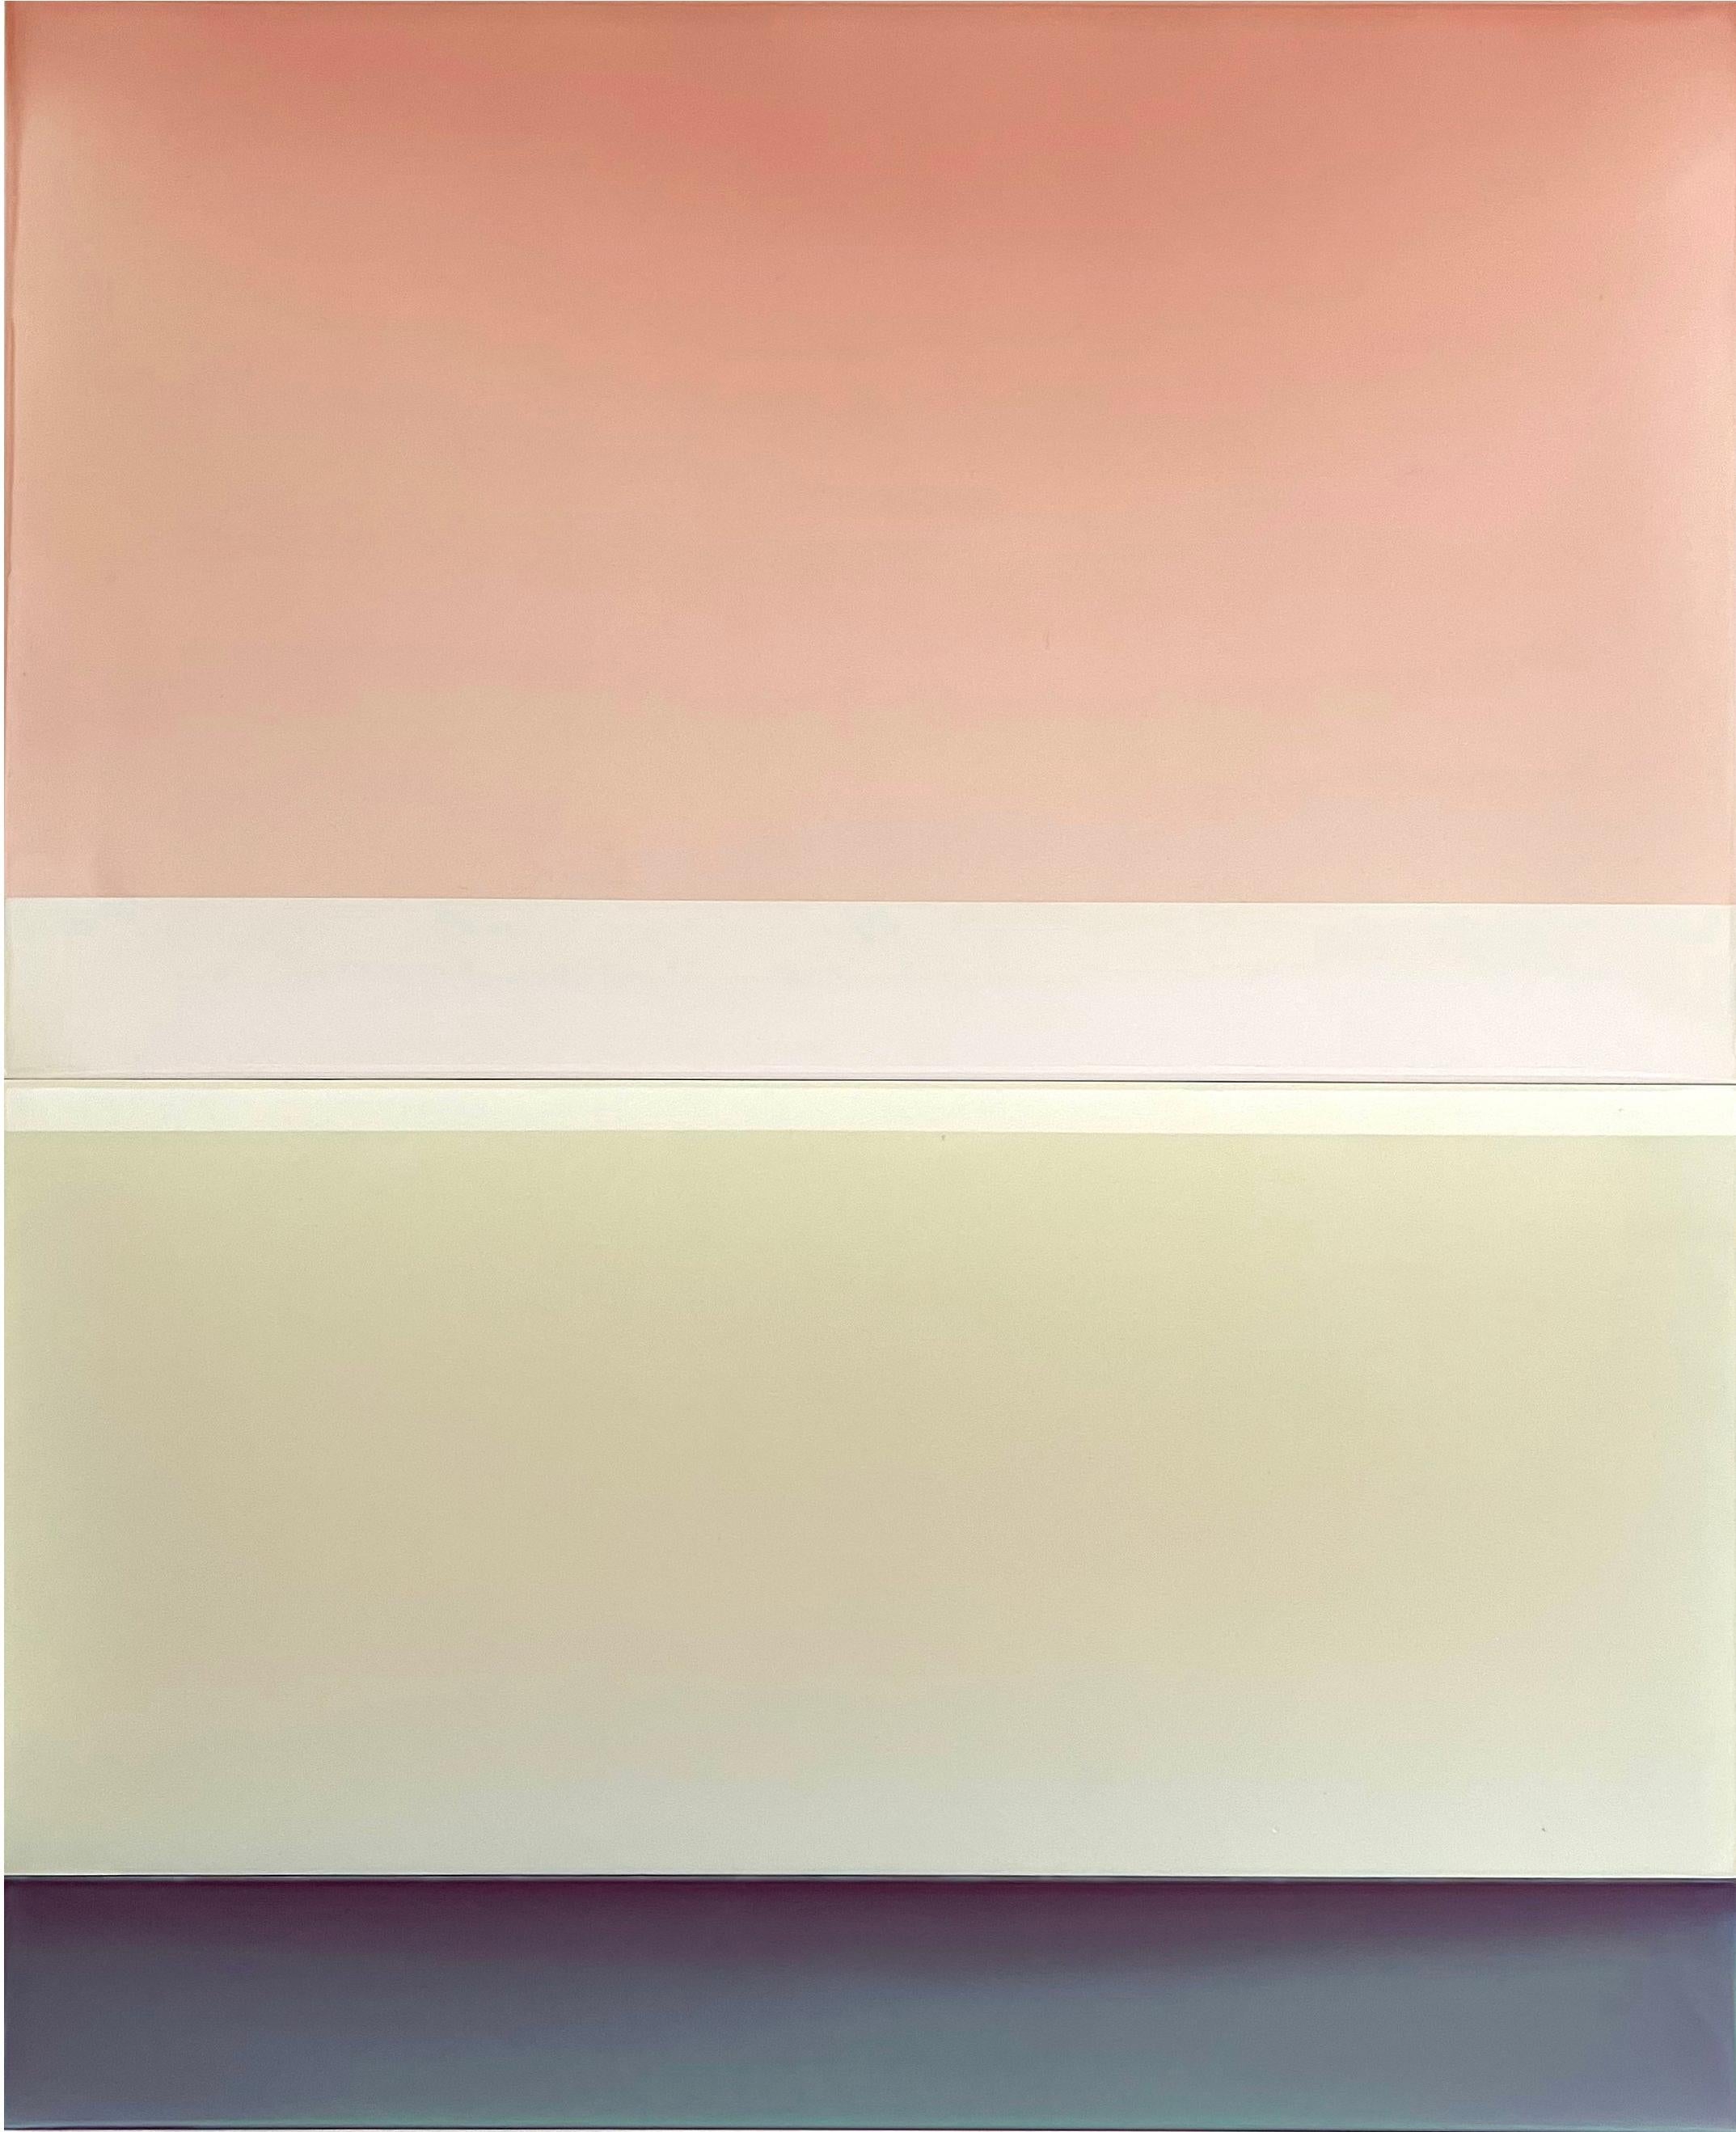 Joachims Dream, Apricot Peach, Pale Yellow Ivory, Violet Tinted Polymer Painting